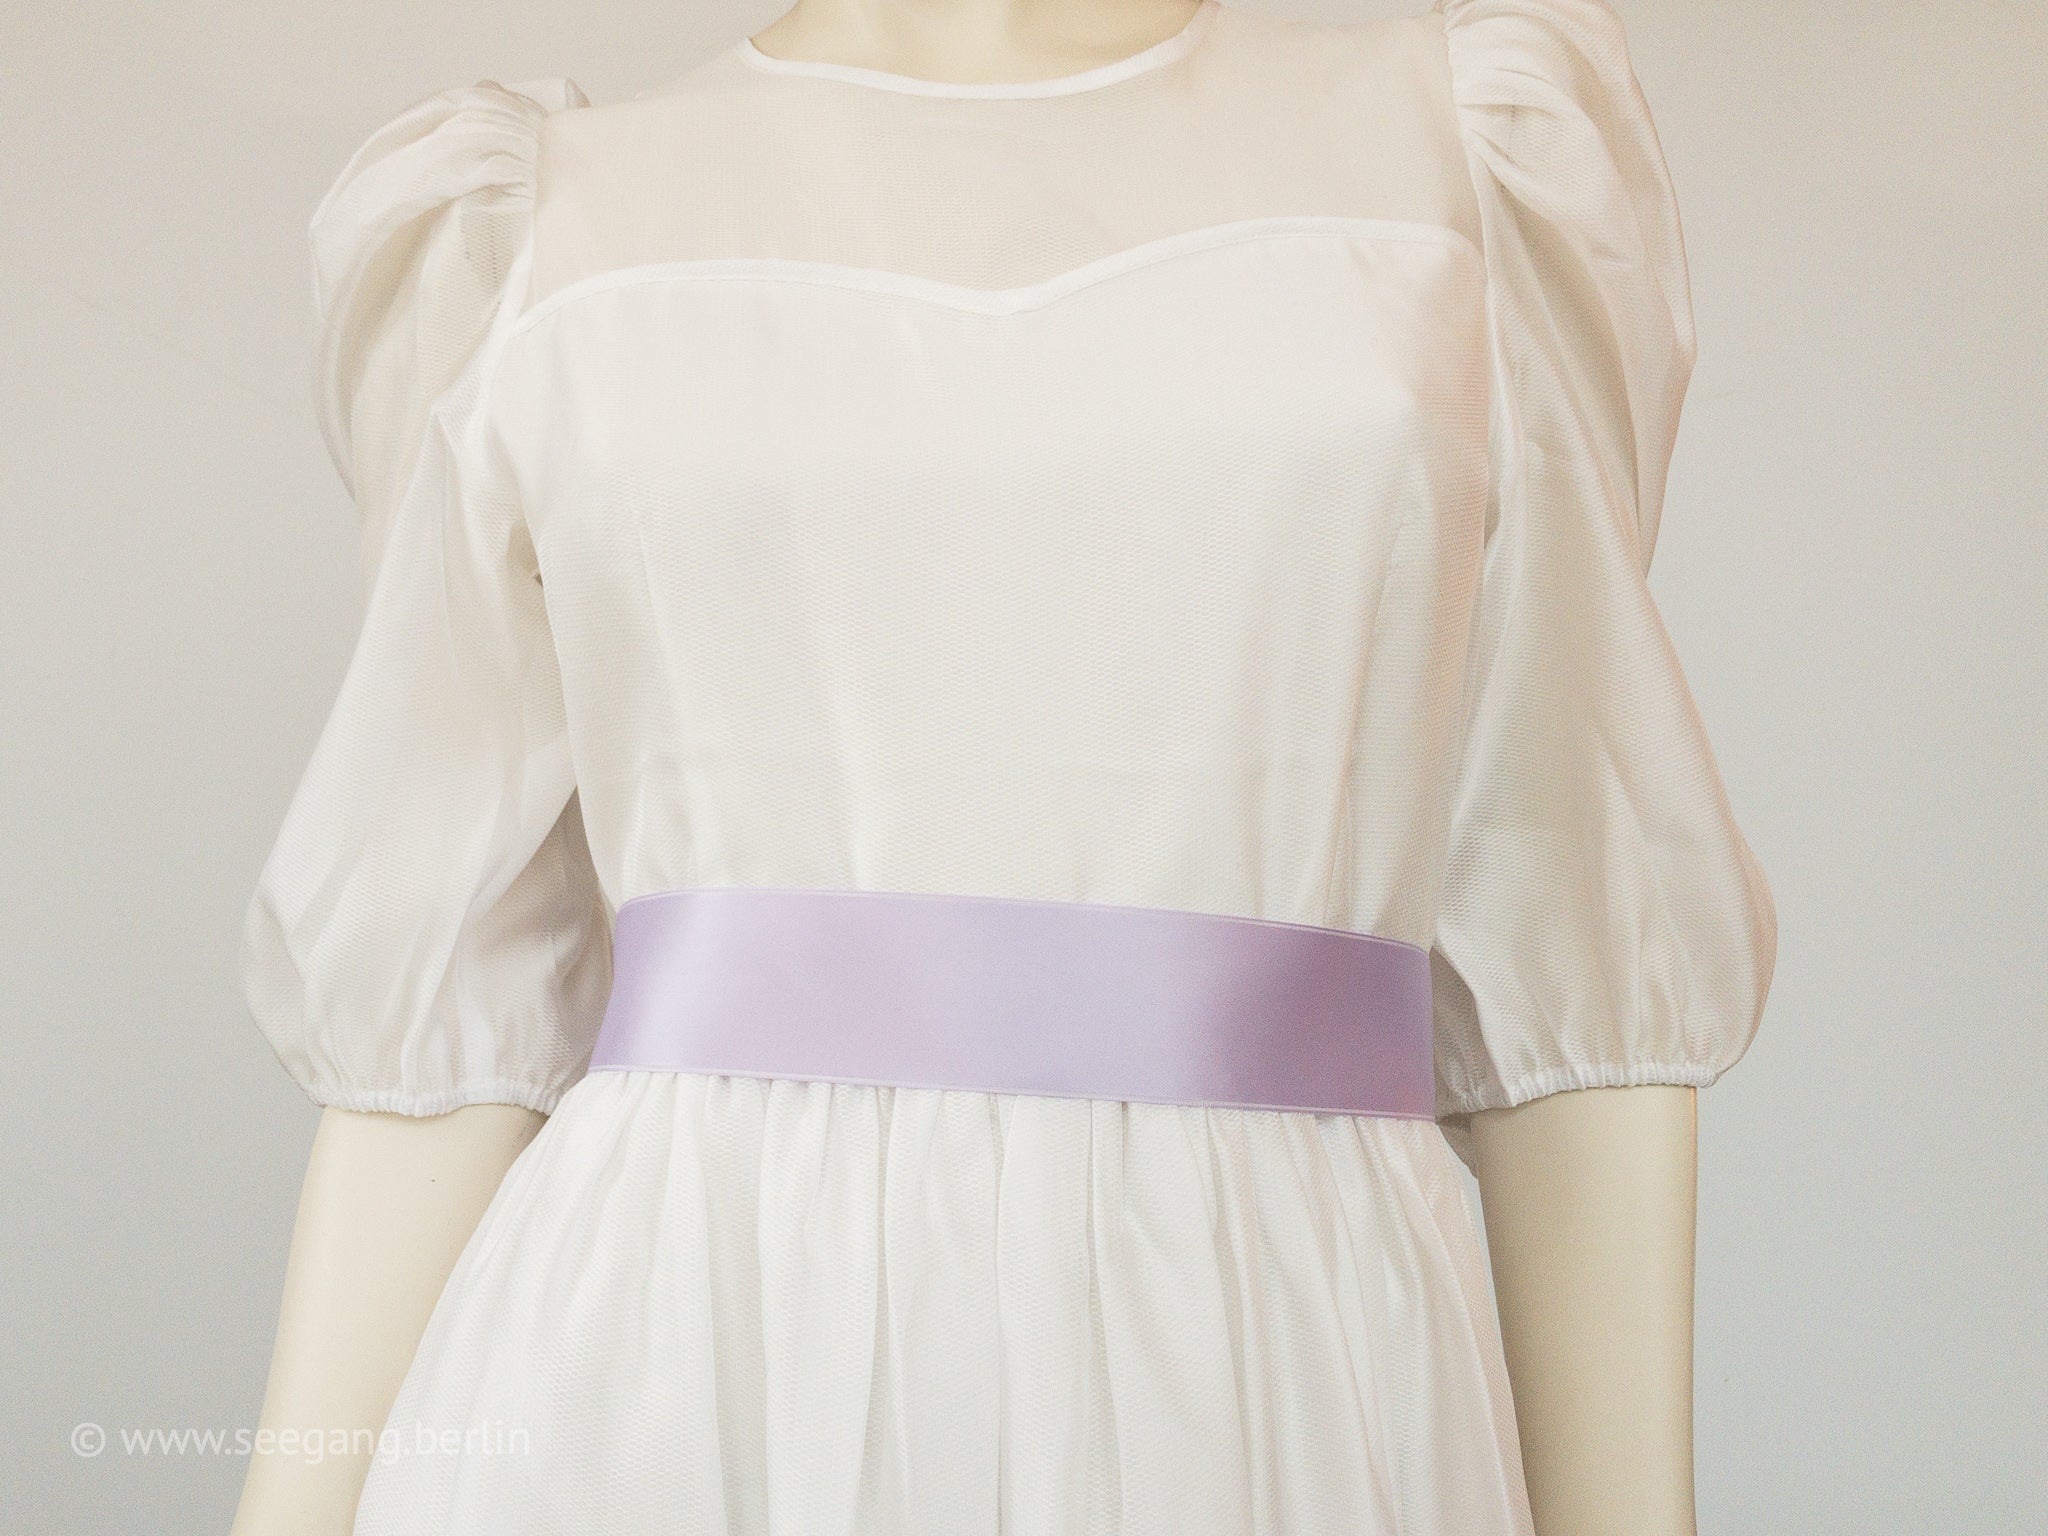 BRIDAL BELT IN MANY SHADES OF LILAC - SWISS QUALITY!